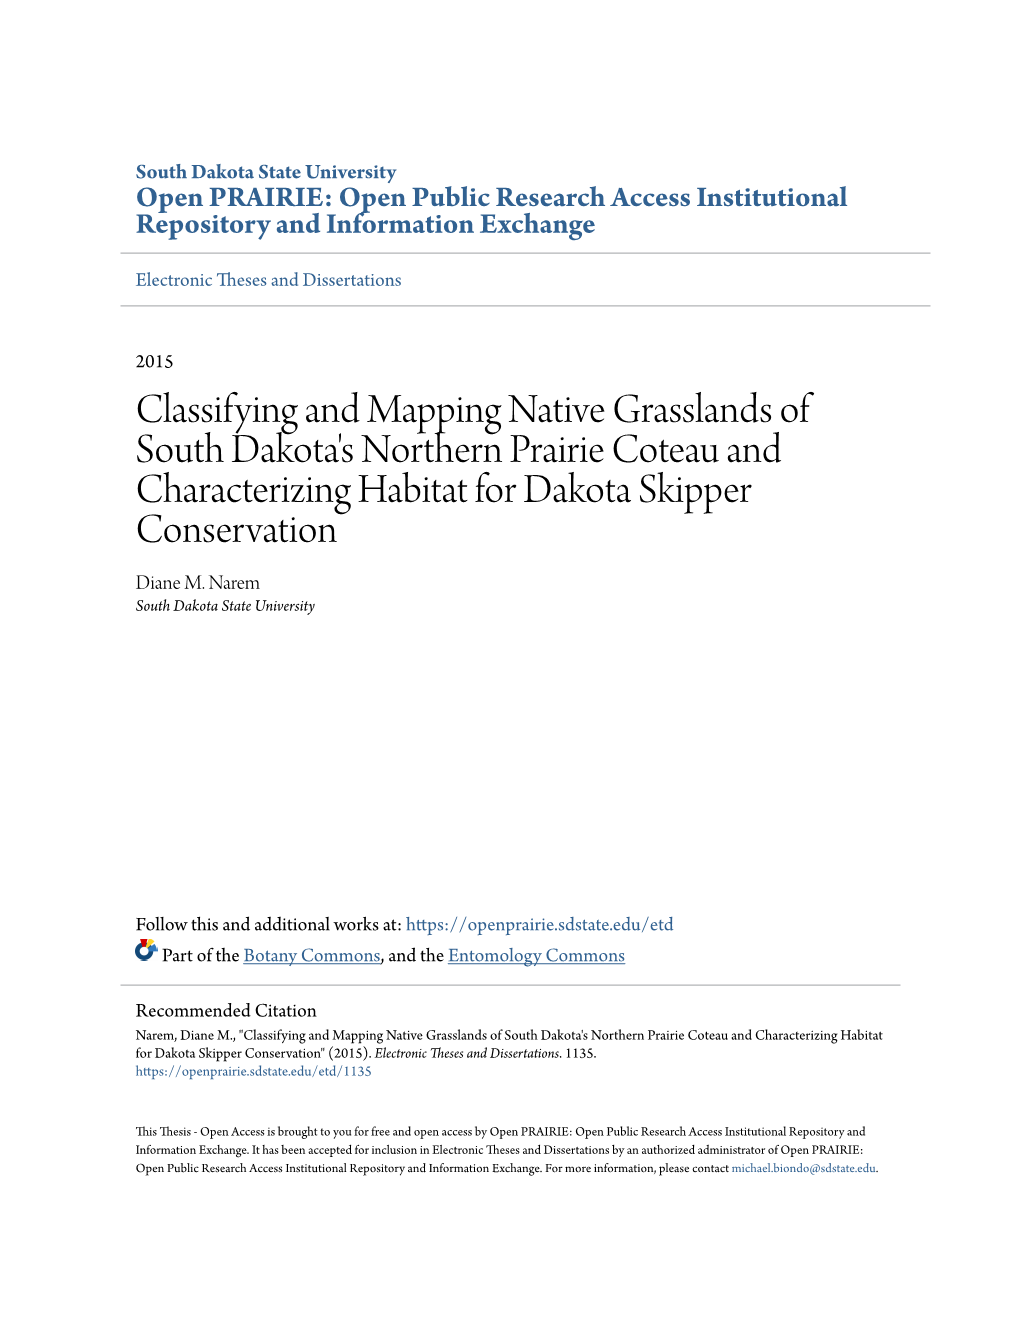 Classifying and Mapping Native Grasslands of South Dakota's Northern Prairie Coteau and Characterizing Habitat for Dakota Skipper Conservation Diane M